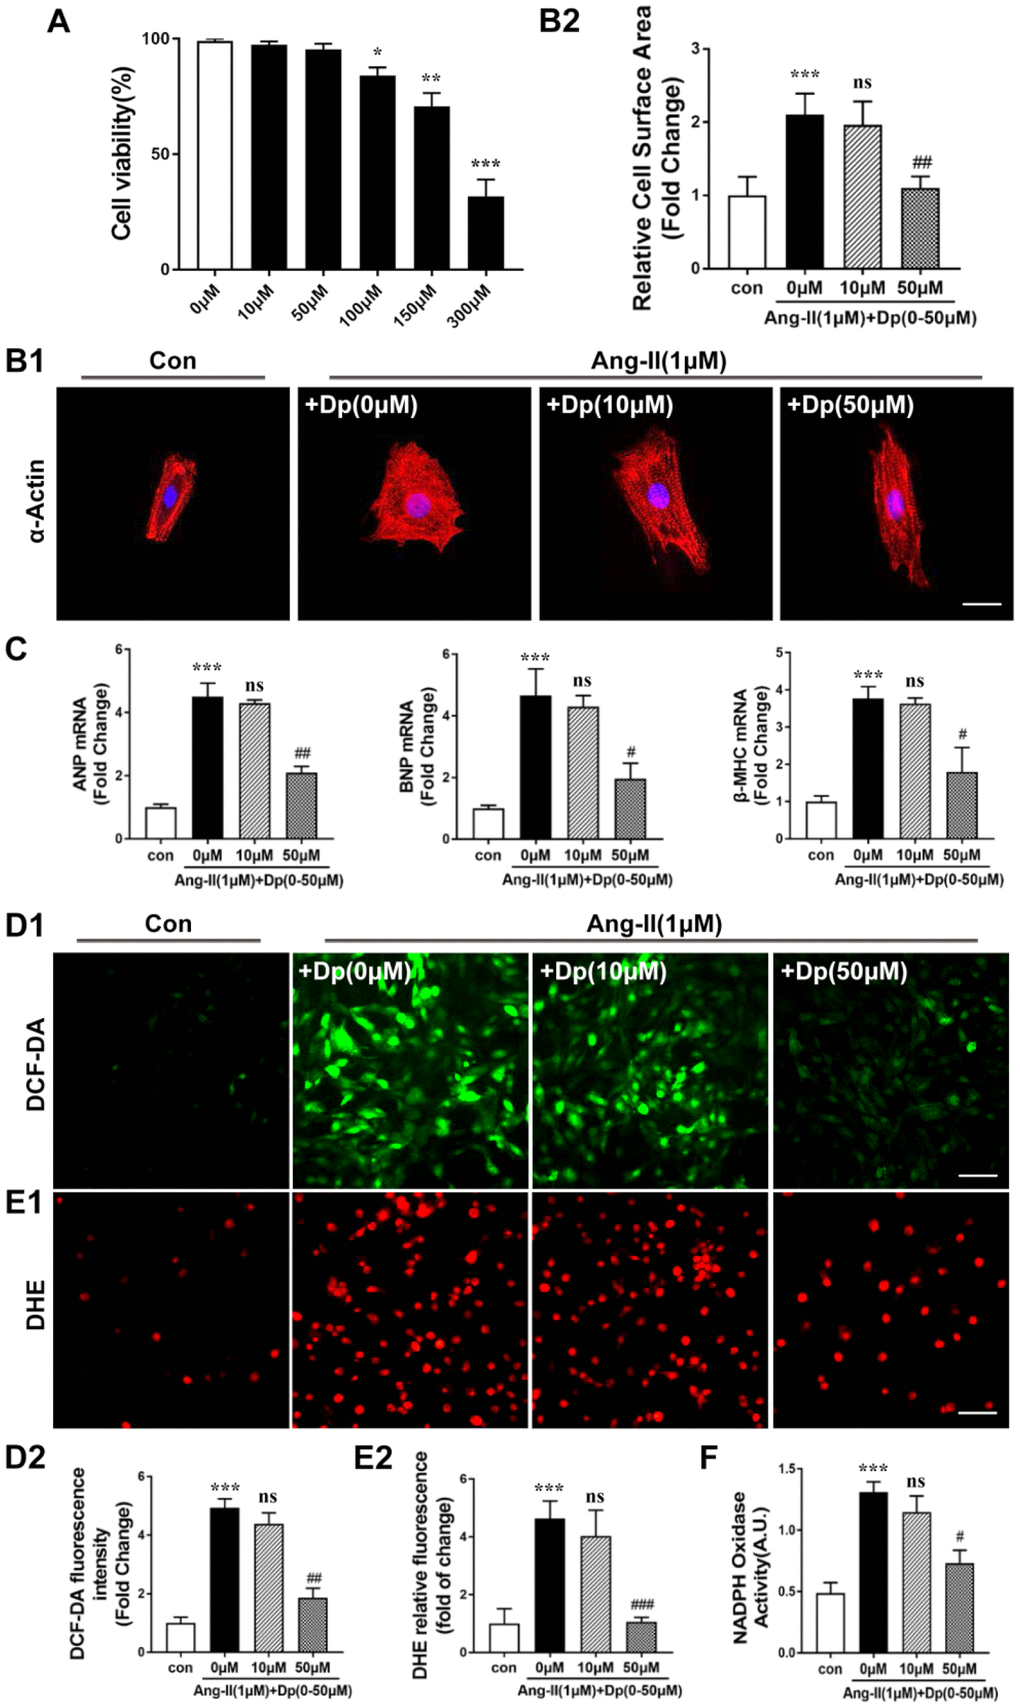 Delphinidin inhibited Ang II-induced hypertrophy in NRCMs. (A) The Cell Counting Kit-8 assay was used to detect the cell viability of cardiomyocytes treated with different concentrations of delphinidin (n=4). (B) NRCMs were treated with Ang II (1 μM) for 24 hours in the presence of delphinidin (10 and 50 μM) or DMSO. α-Actinin staining was performed to determine cell size. Representative images (left) and quantified cell sizes (right) of each group are shown (scale bar=20 μm). Cell surface areas (μm2) were measured in 3 independent experiments with at least 100 cells counted for each condition. (C) qRT-PCR was performed to analyze the expression of hypertrophic genes. (D and E) Representative image and results of quantitative analysis of ROS generation measured by DCF-DA and DHE staining. (F) Statistical analysis of differences in nicotinamide adenine dinucleotide phosphate (NADPH) oxidase activity. A.U., arbitrary units. In A–F,**p versus the control group; ***p versus the control group; ns versus the Ang II group; #p versus the Ang II group; ##p versus the Ang II group; ###p versus the Ang II group.